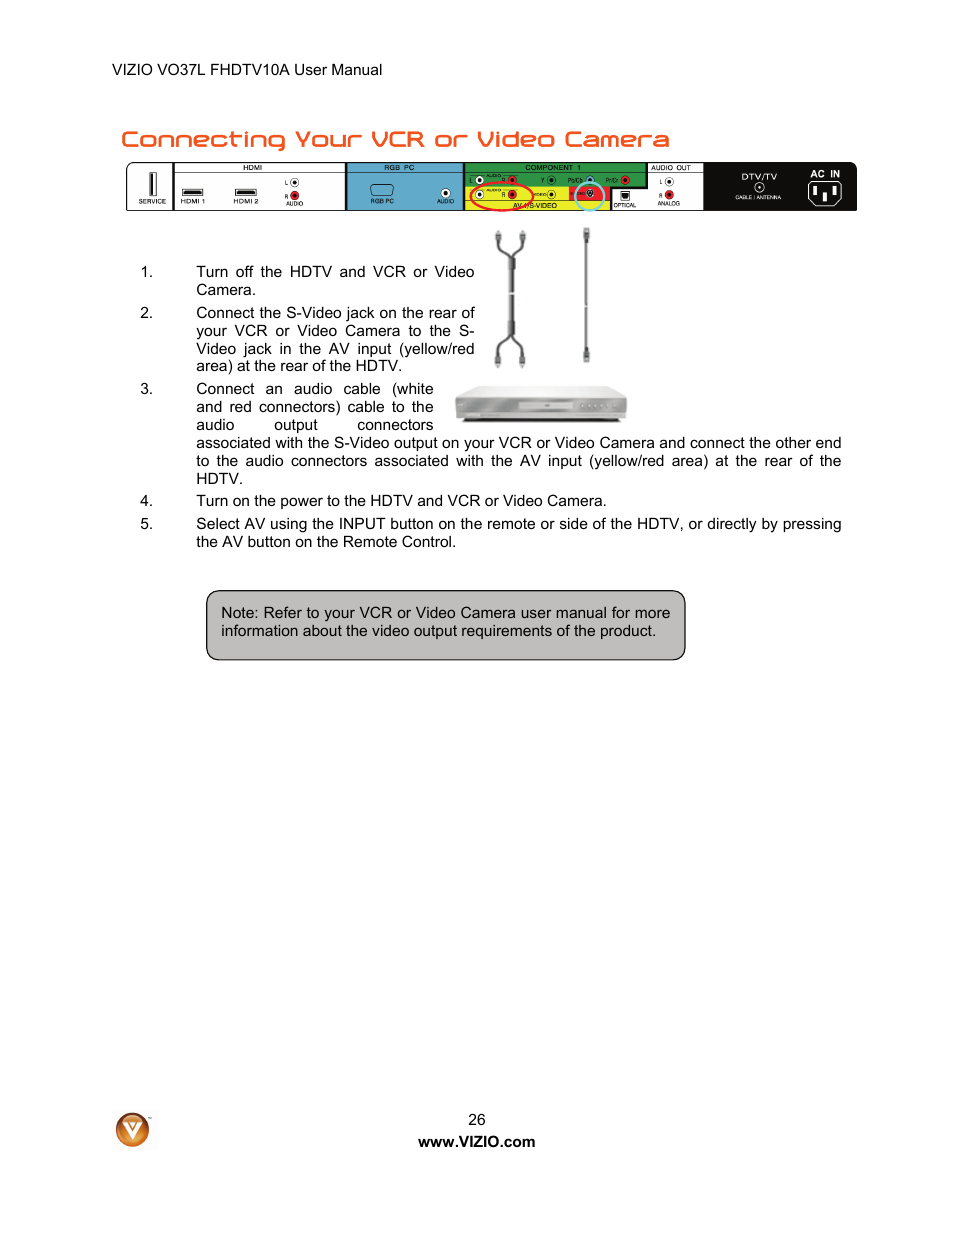 Connecting your vcr or video camera | Vizio VO37L FHDTV10A User Manual | Page 26 / 80